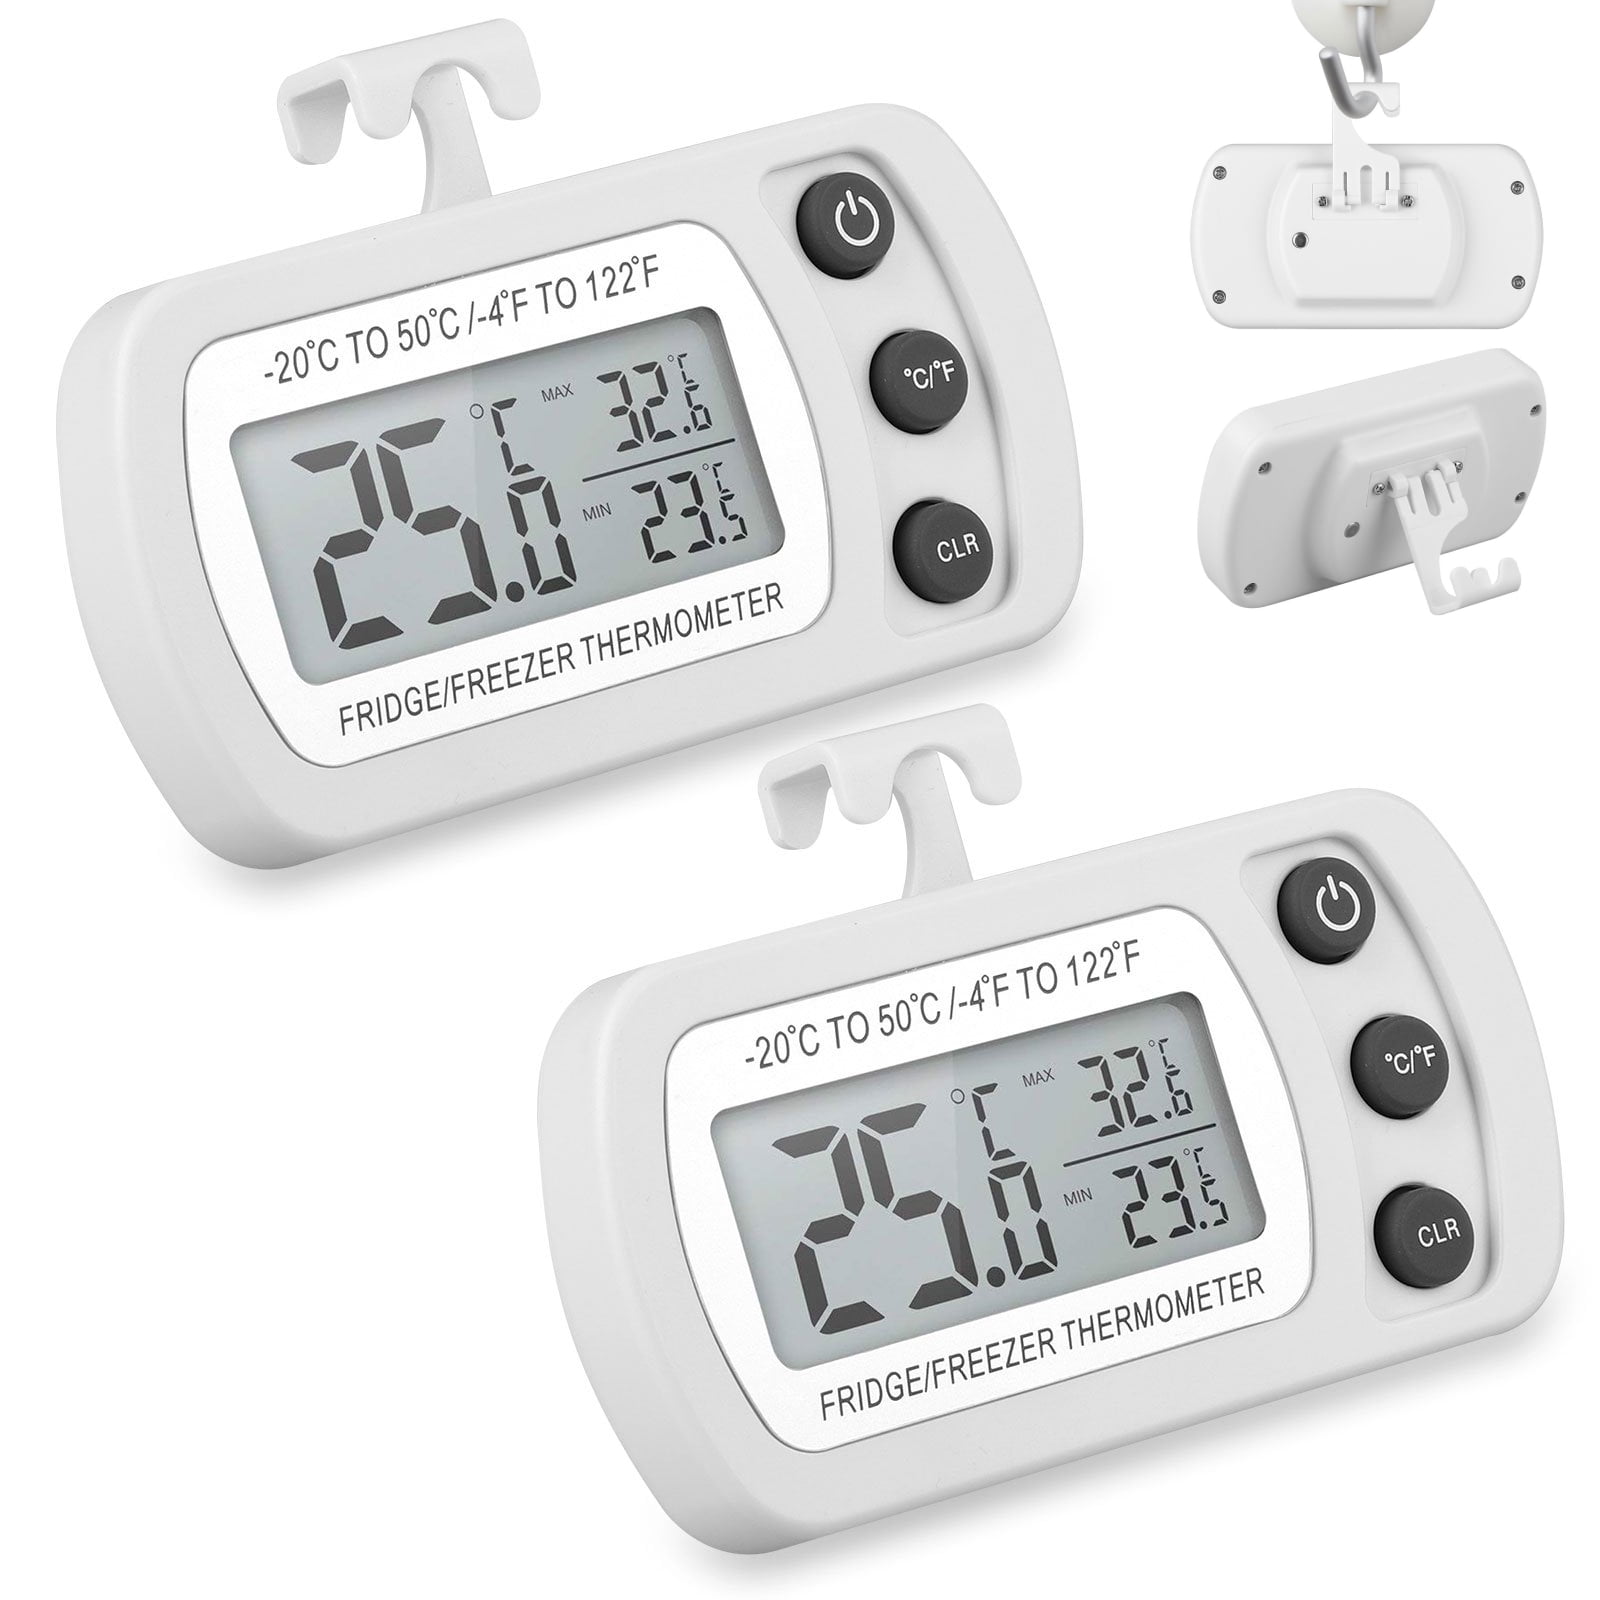 Digital Thermometer With Hook Waterproof Freezer Thermometer Home TOOGOO Refrigerator Thermometer Lcd Display Max/Min Record 2 Pack Restaurants For Kitchen ℃/℉ Switch 